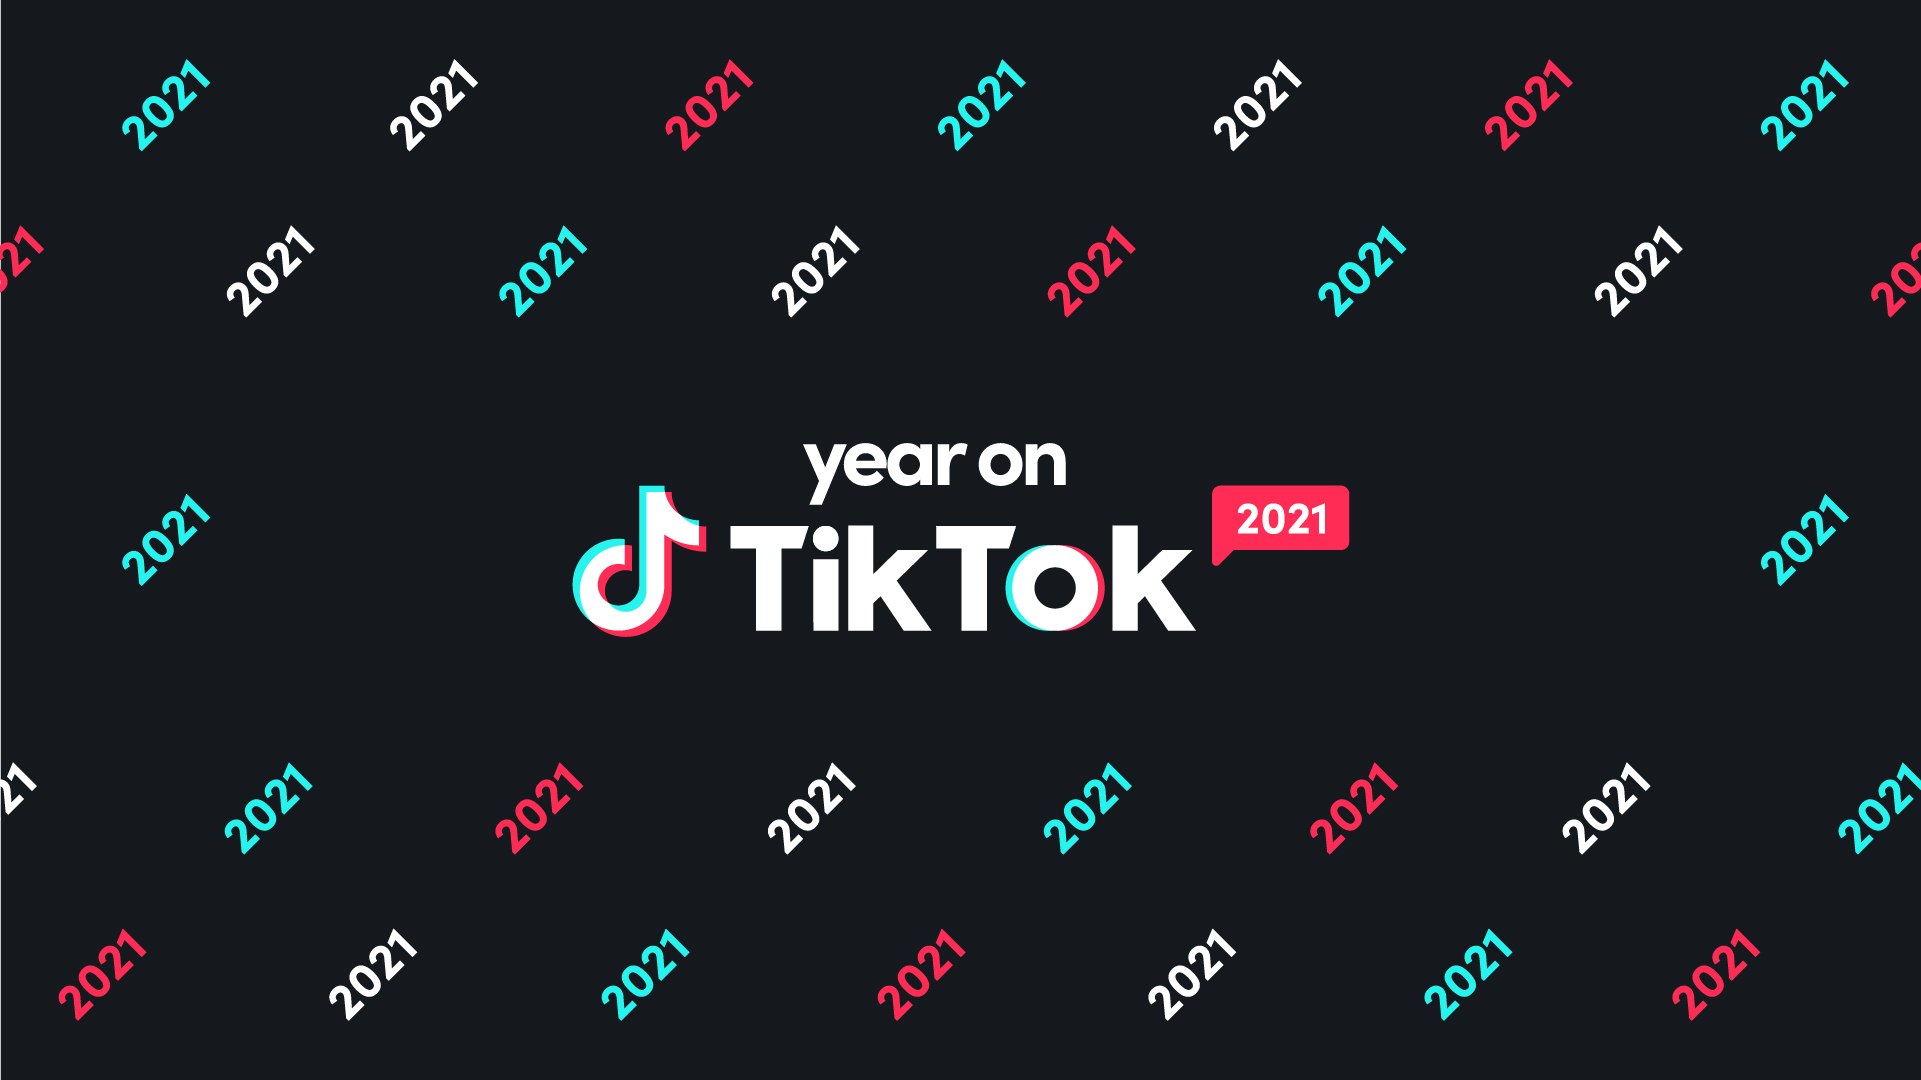 Brandweerman namens Rubber Year on TikTok: Celebrating the brands that entertained and products that  sparked joy amongst our community | TikTok Newsroom